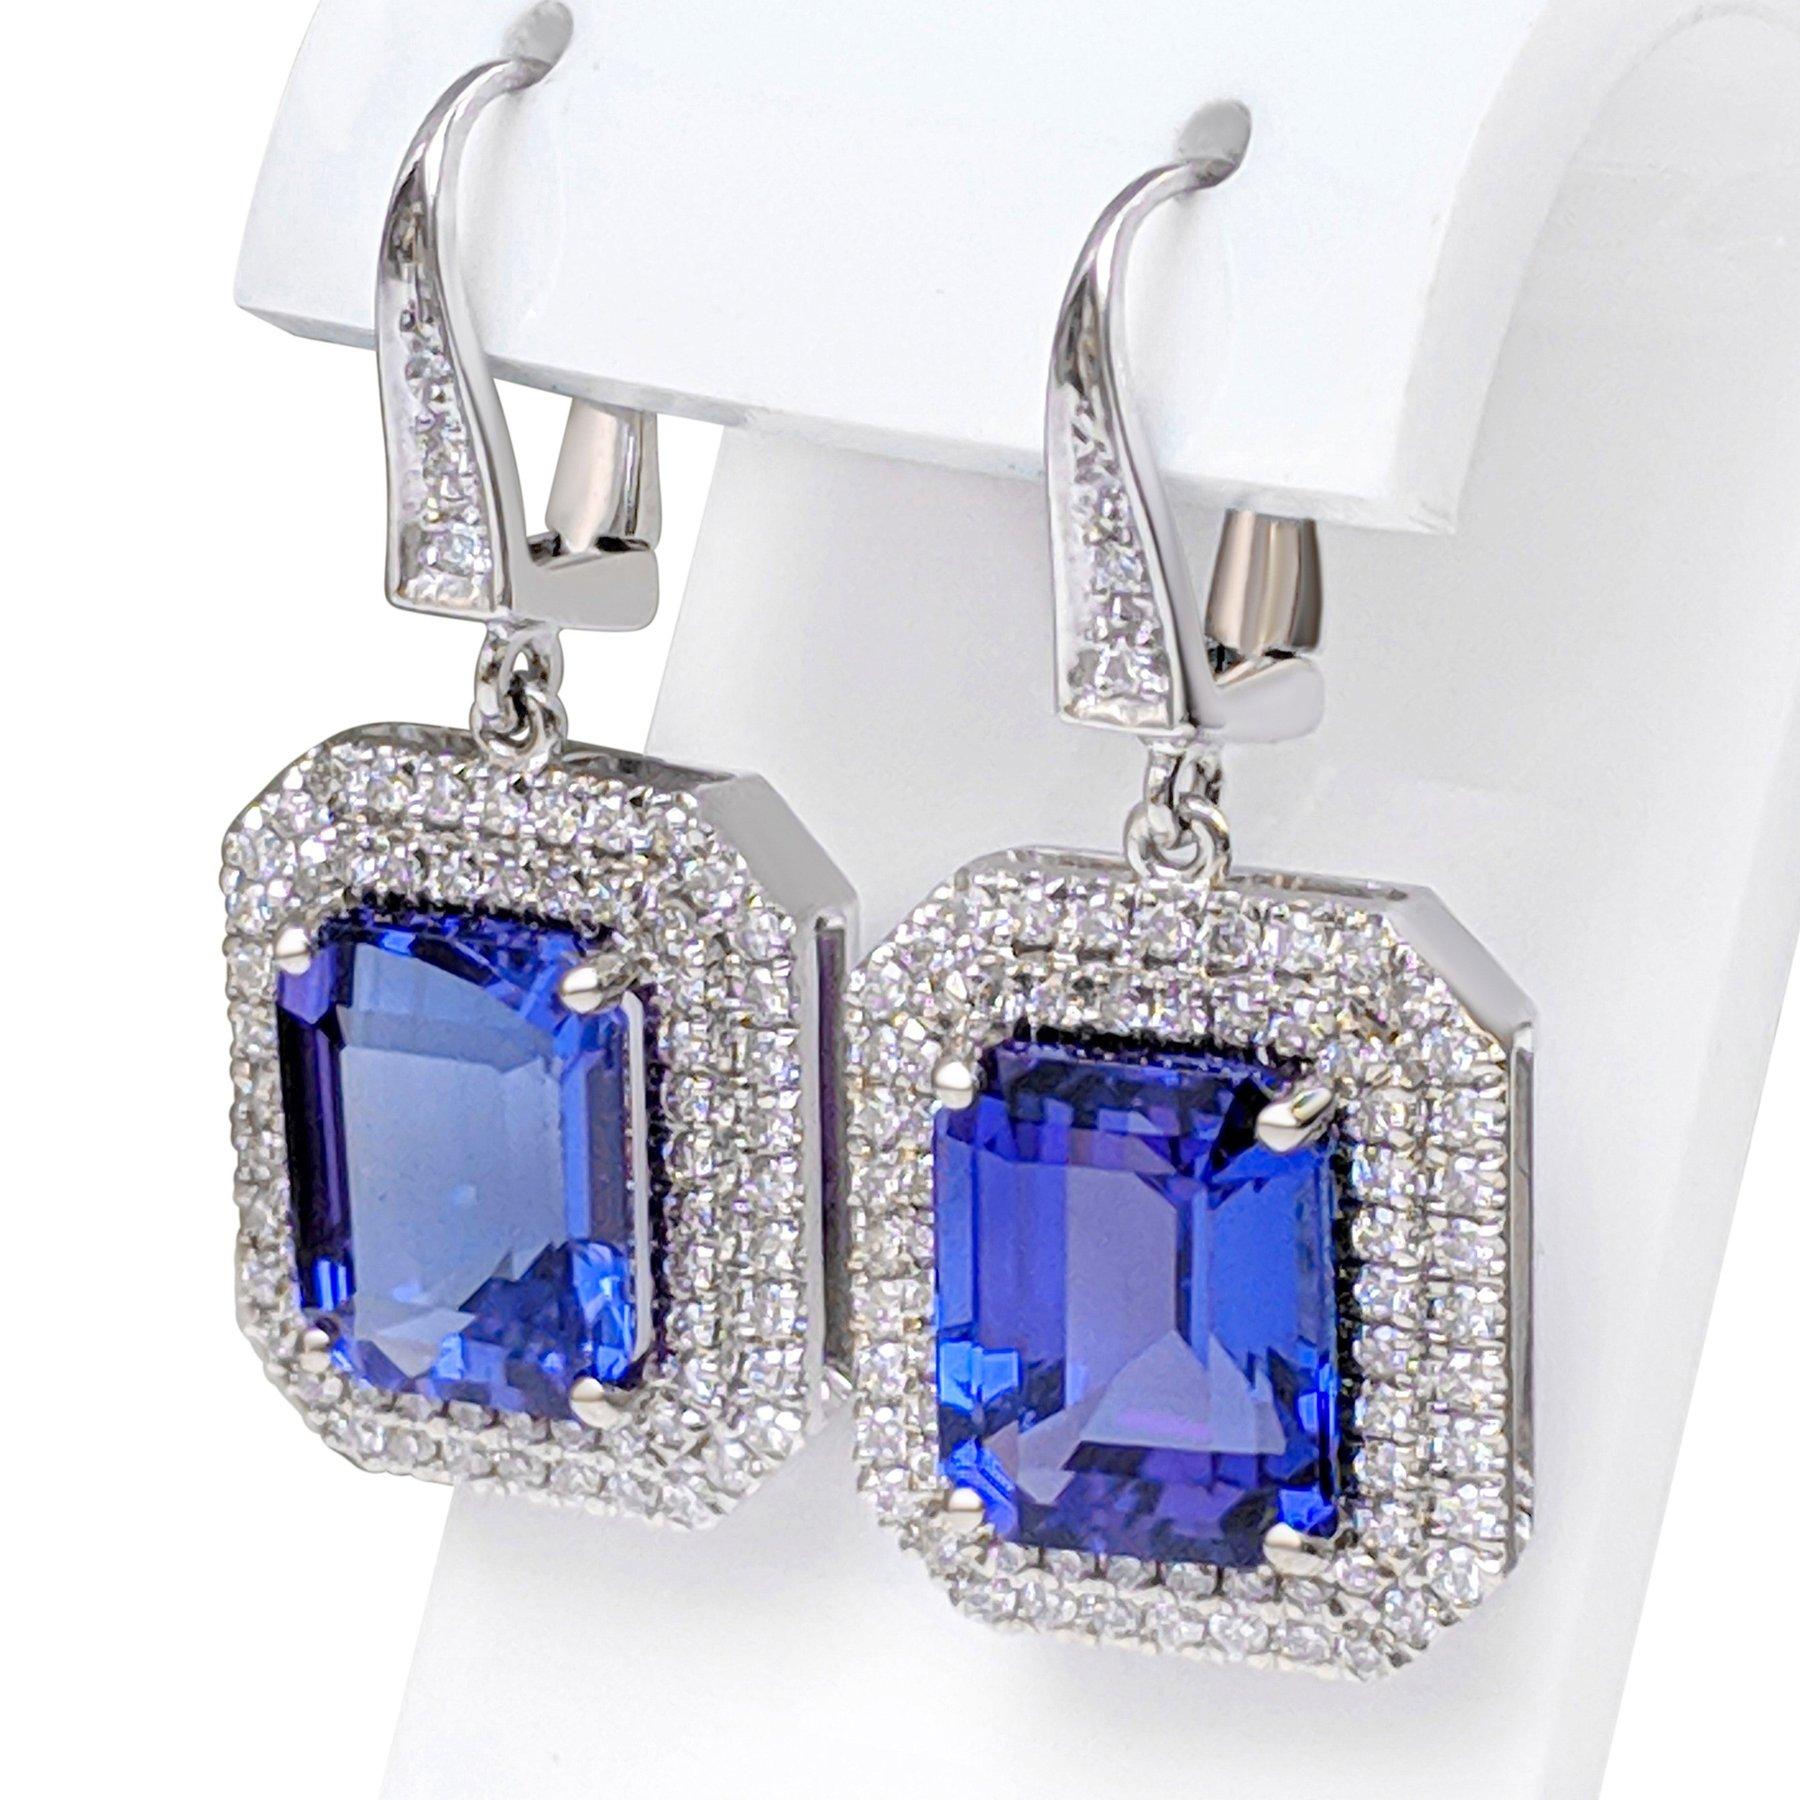 10.30 Carat Tanzanite and 1.25Ct Diamonds Halo - 18 kt. White gold - Earrings In New Condition For Sale In Ramat Gan, IL